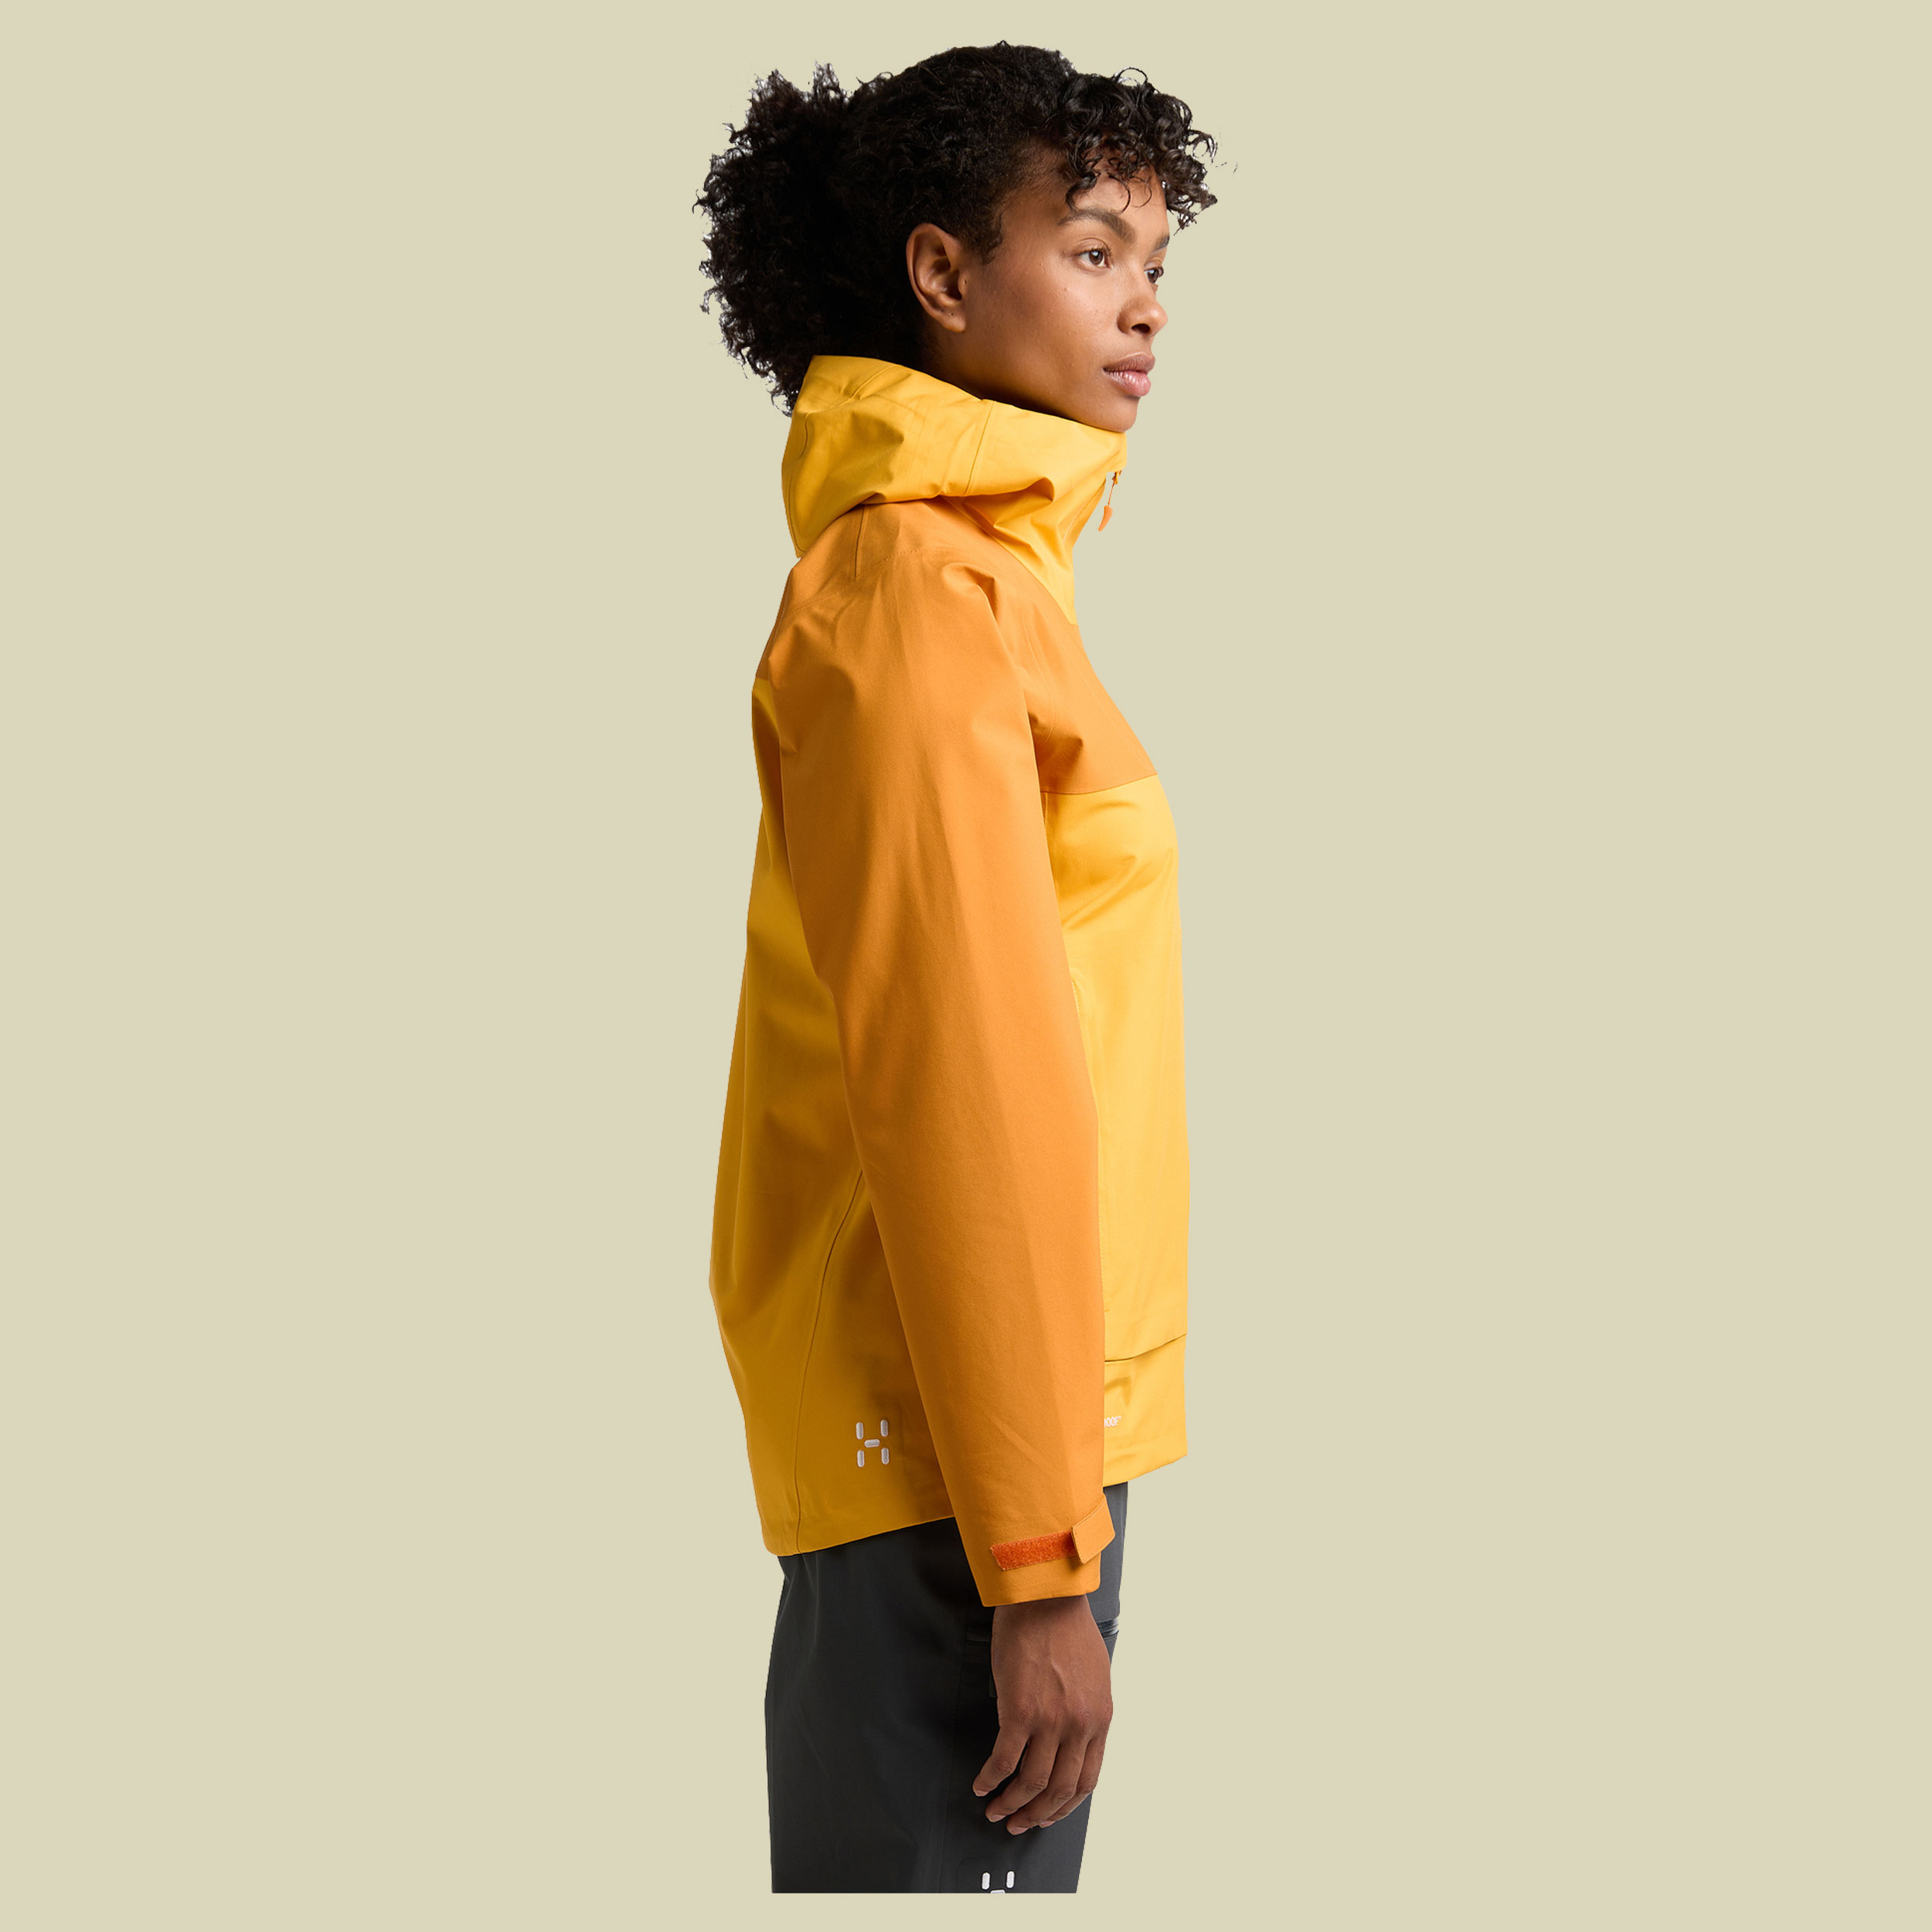 Front Proof Jacket Women Größe S Farbe sunny yellow/desert yellow